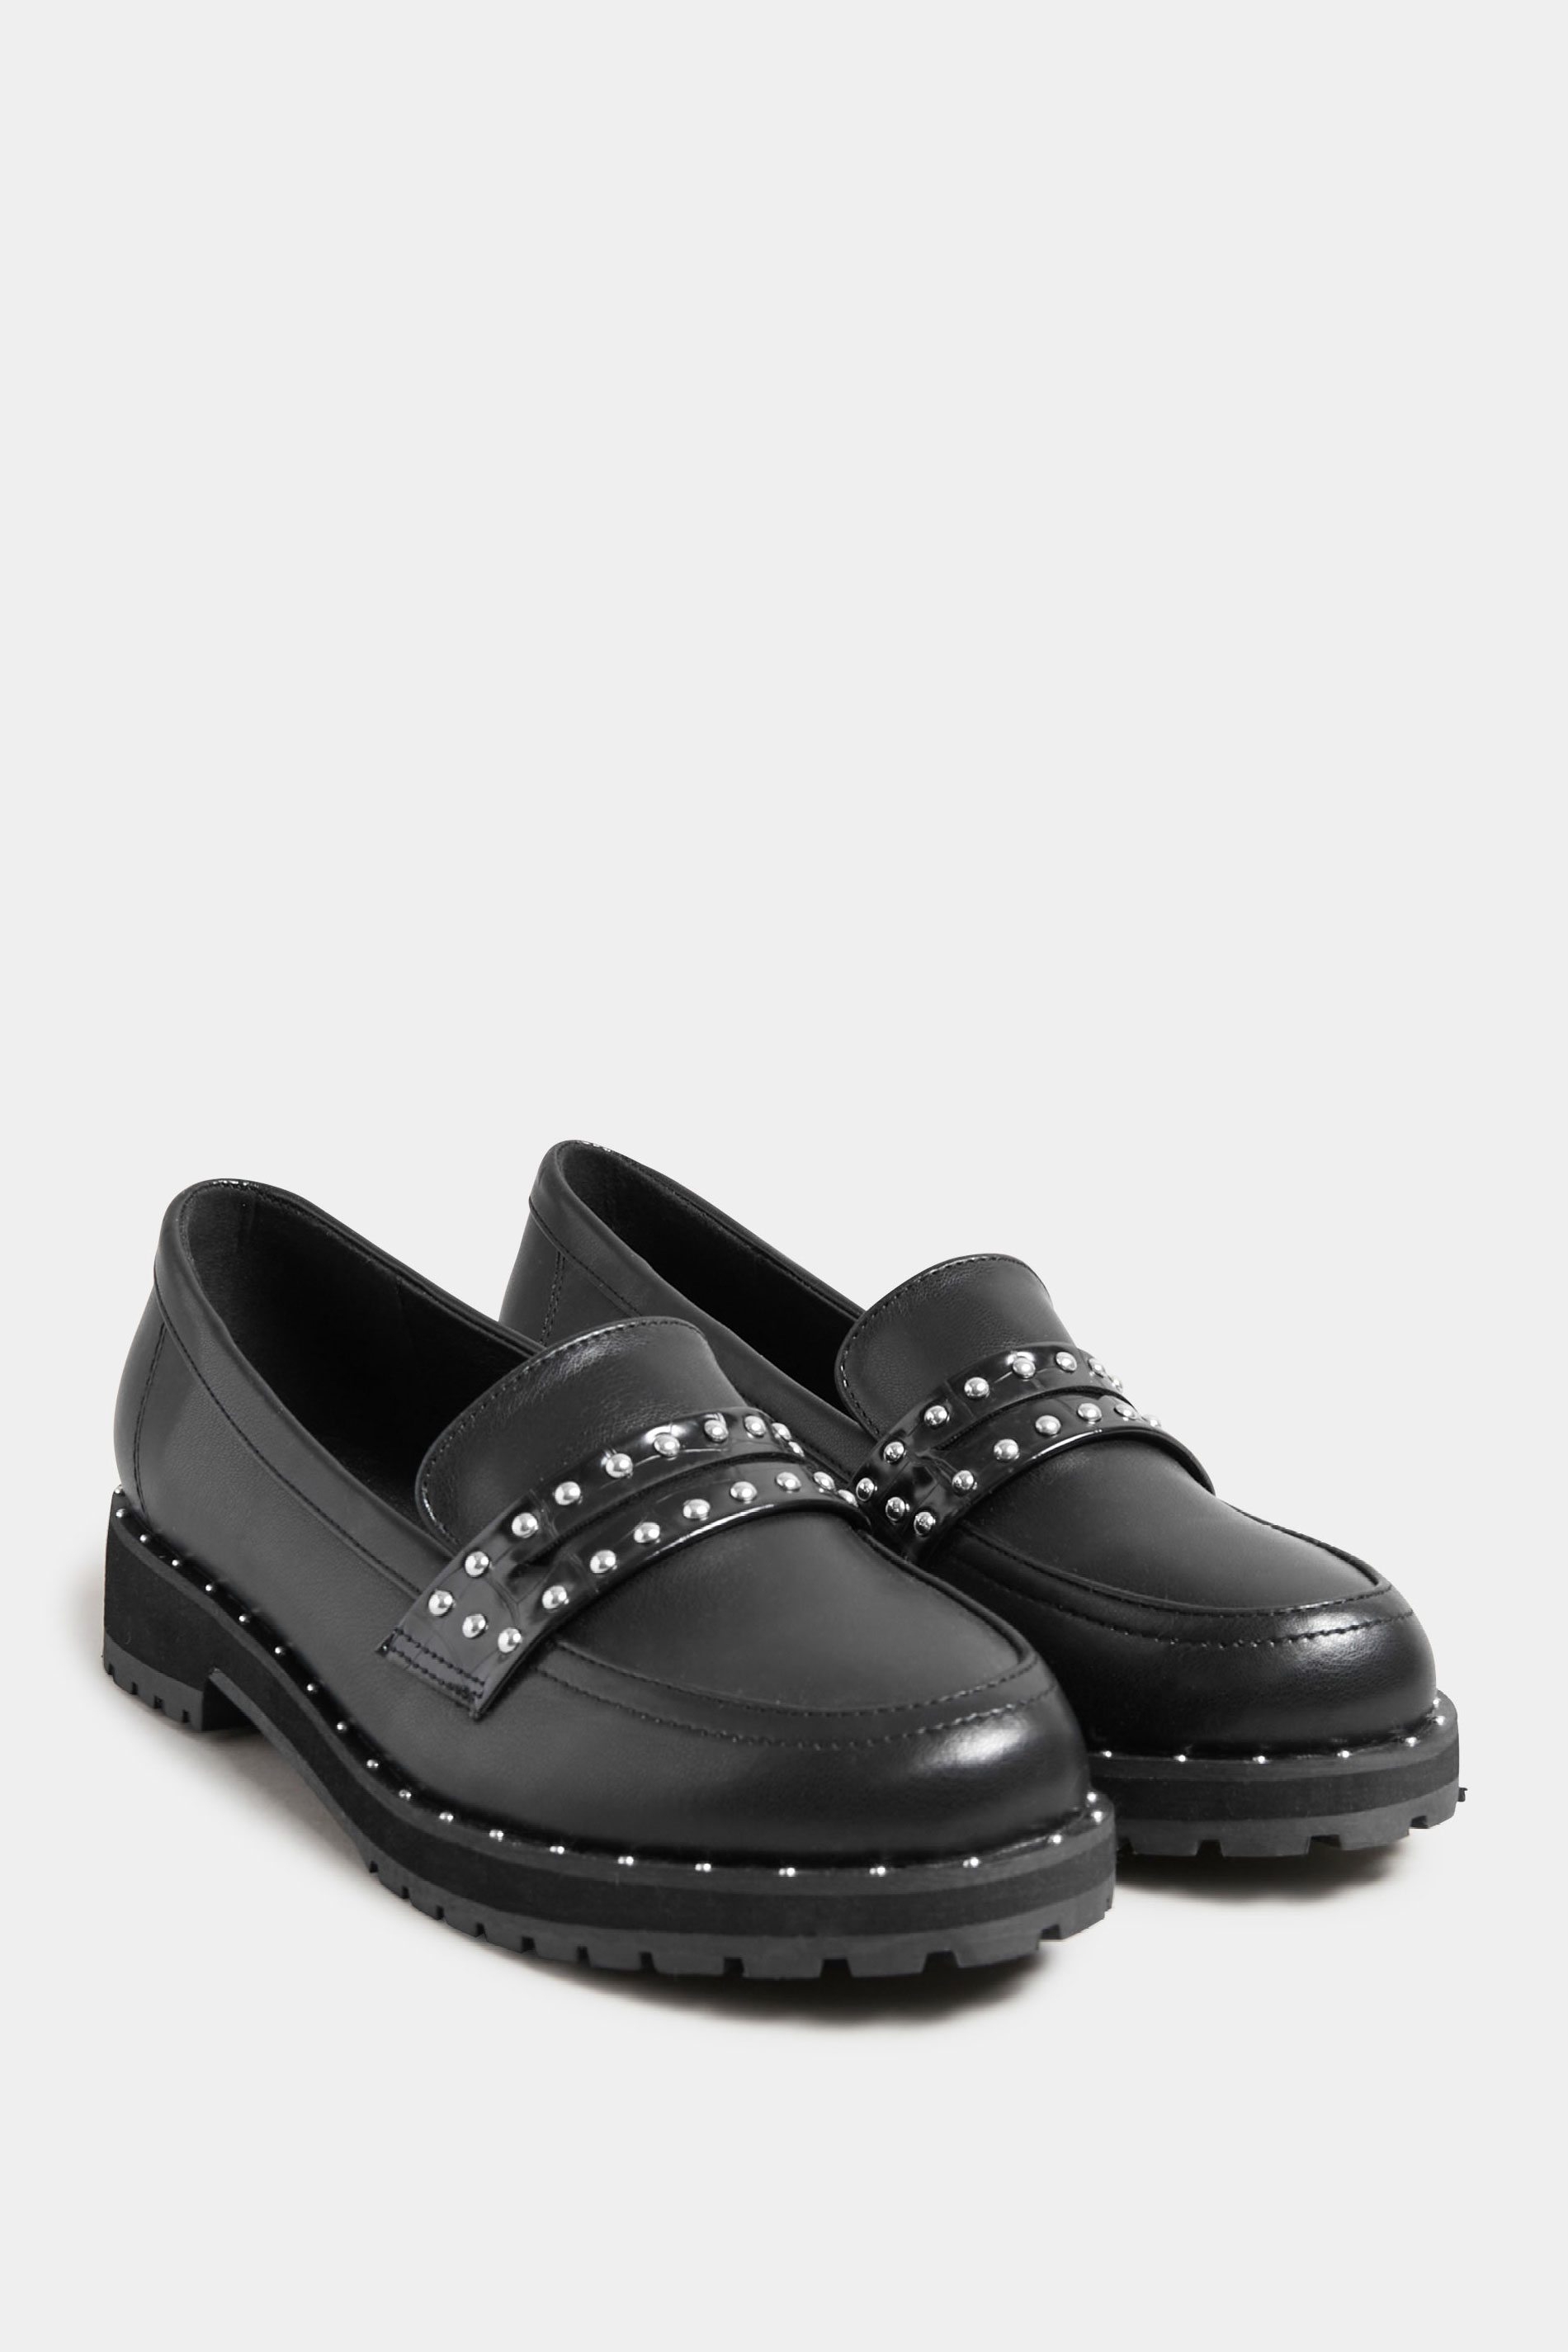 LTS Black Stud Loafers In Standard Fit | Long Tall Sally 2